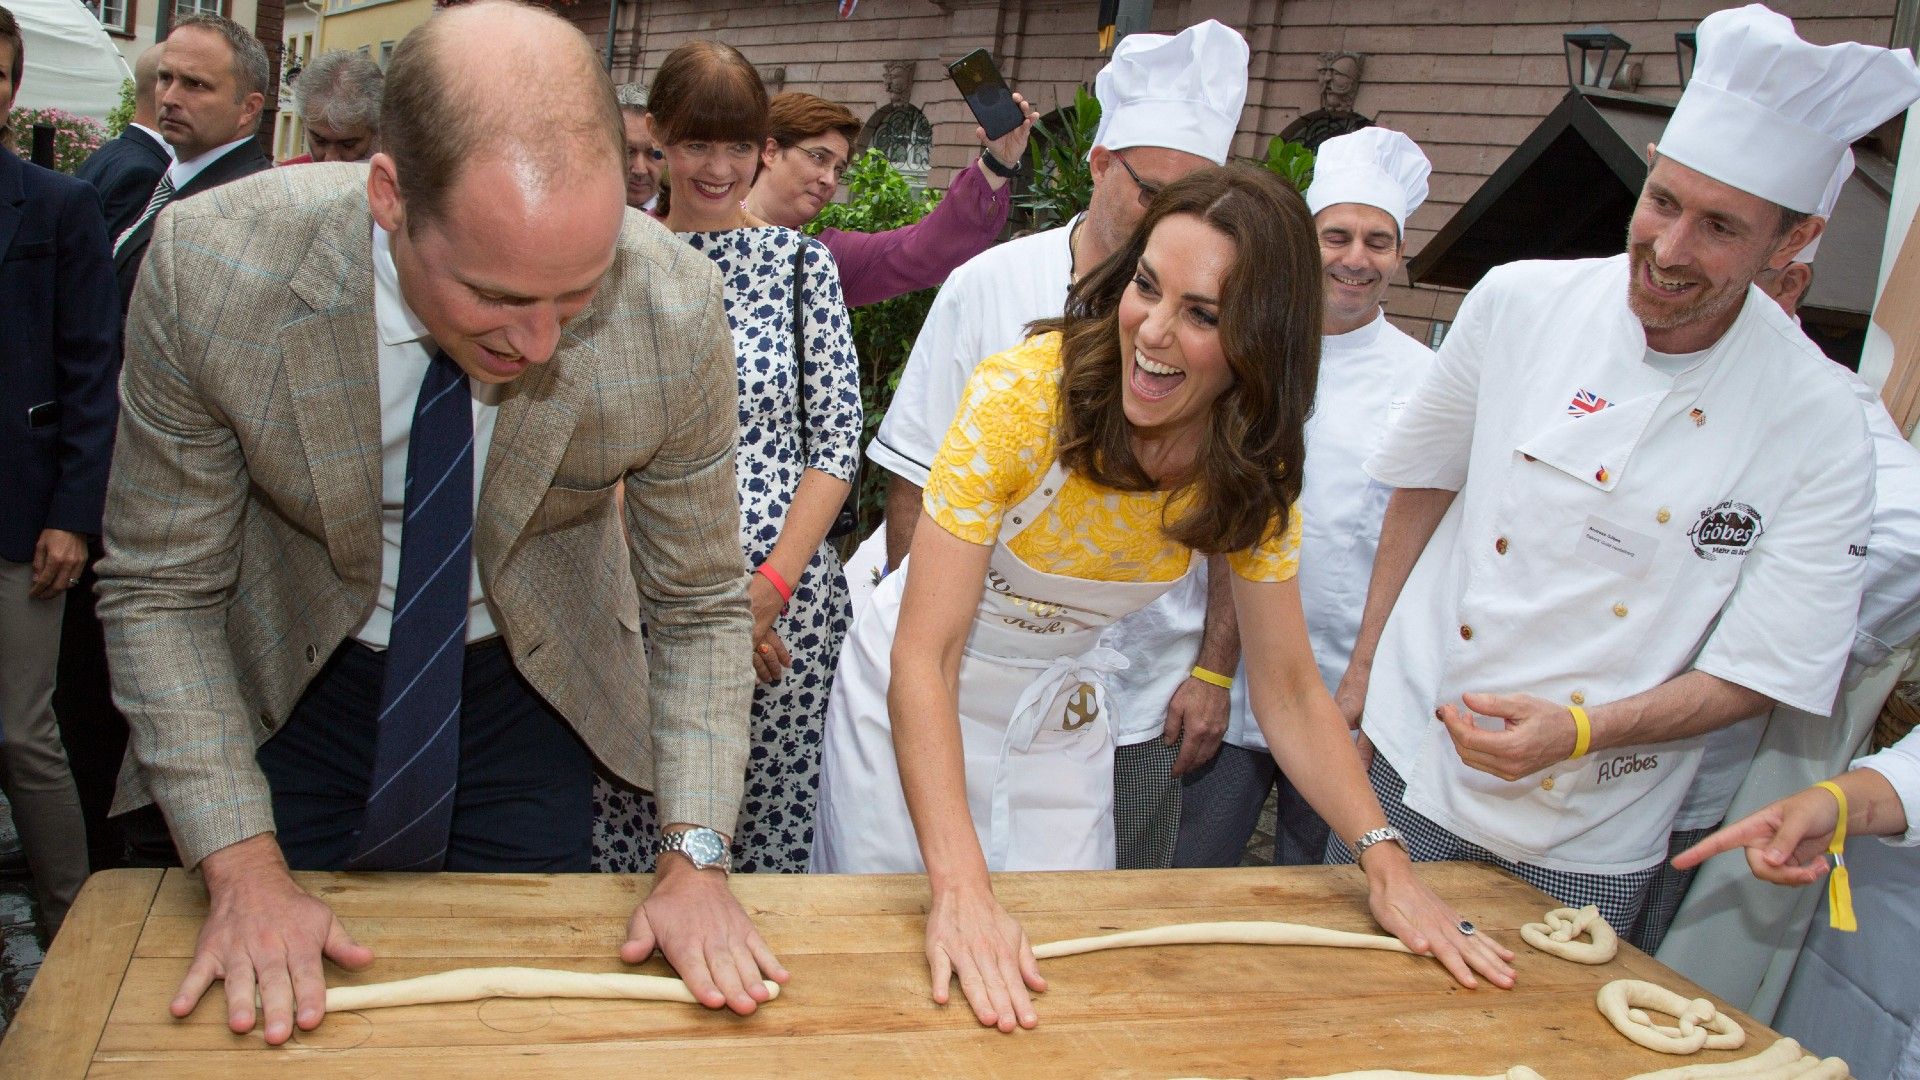 <p>                     During their 2017 tour of Germany and Poland, William and Kate got a hands-on lesson in some traditional treat making.                   </p>                                      <p>                     The couple took part in a class teaching how to hand-roll pretzels at a market in Heidelberg.                   </p>                                      <p>                     Dressed in a bright yellow lace dress, Kate's outfit was protected by an apron that translated to read, "We're baking for William and Kate", <a href="https://news.yahoo.com/kate-middleton-got-schooled-pretzel-195600620.html">per Yahoo</a>.                   </p>                                      <p>                     Kate, ever the competitive one, was said to have dove right in, proving a natural and enjoying a cheeky laugh at her husband, who struggled to get into the swing of things. You could say he got himself all twisted up like a pretzel...                   </p>